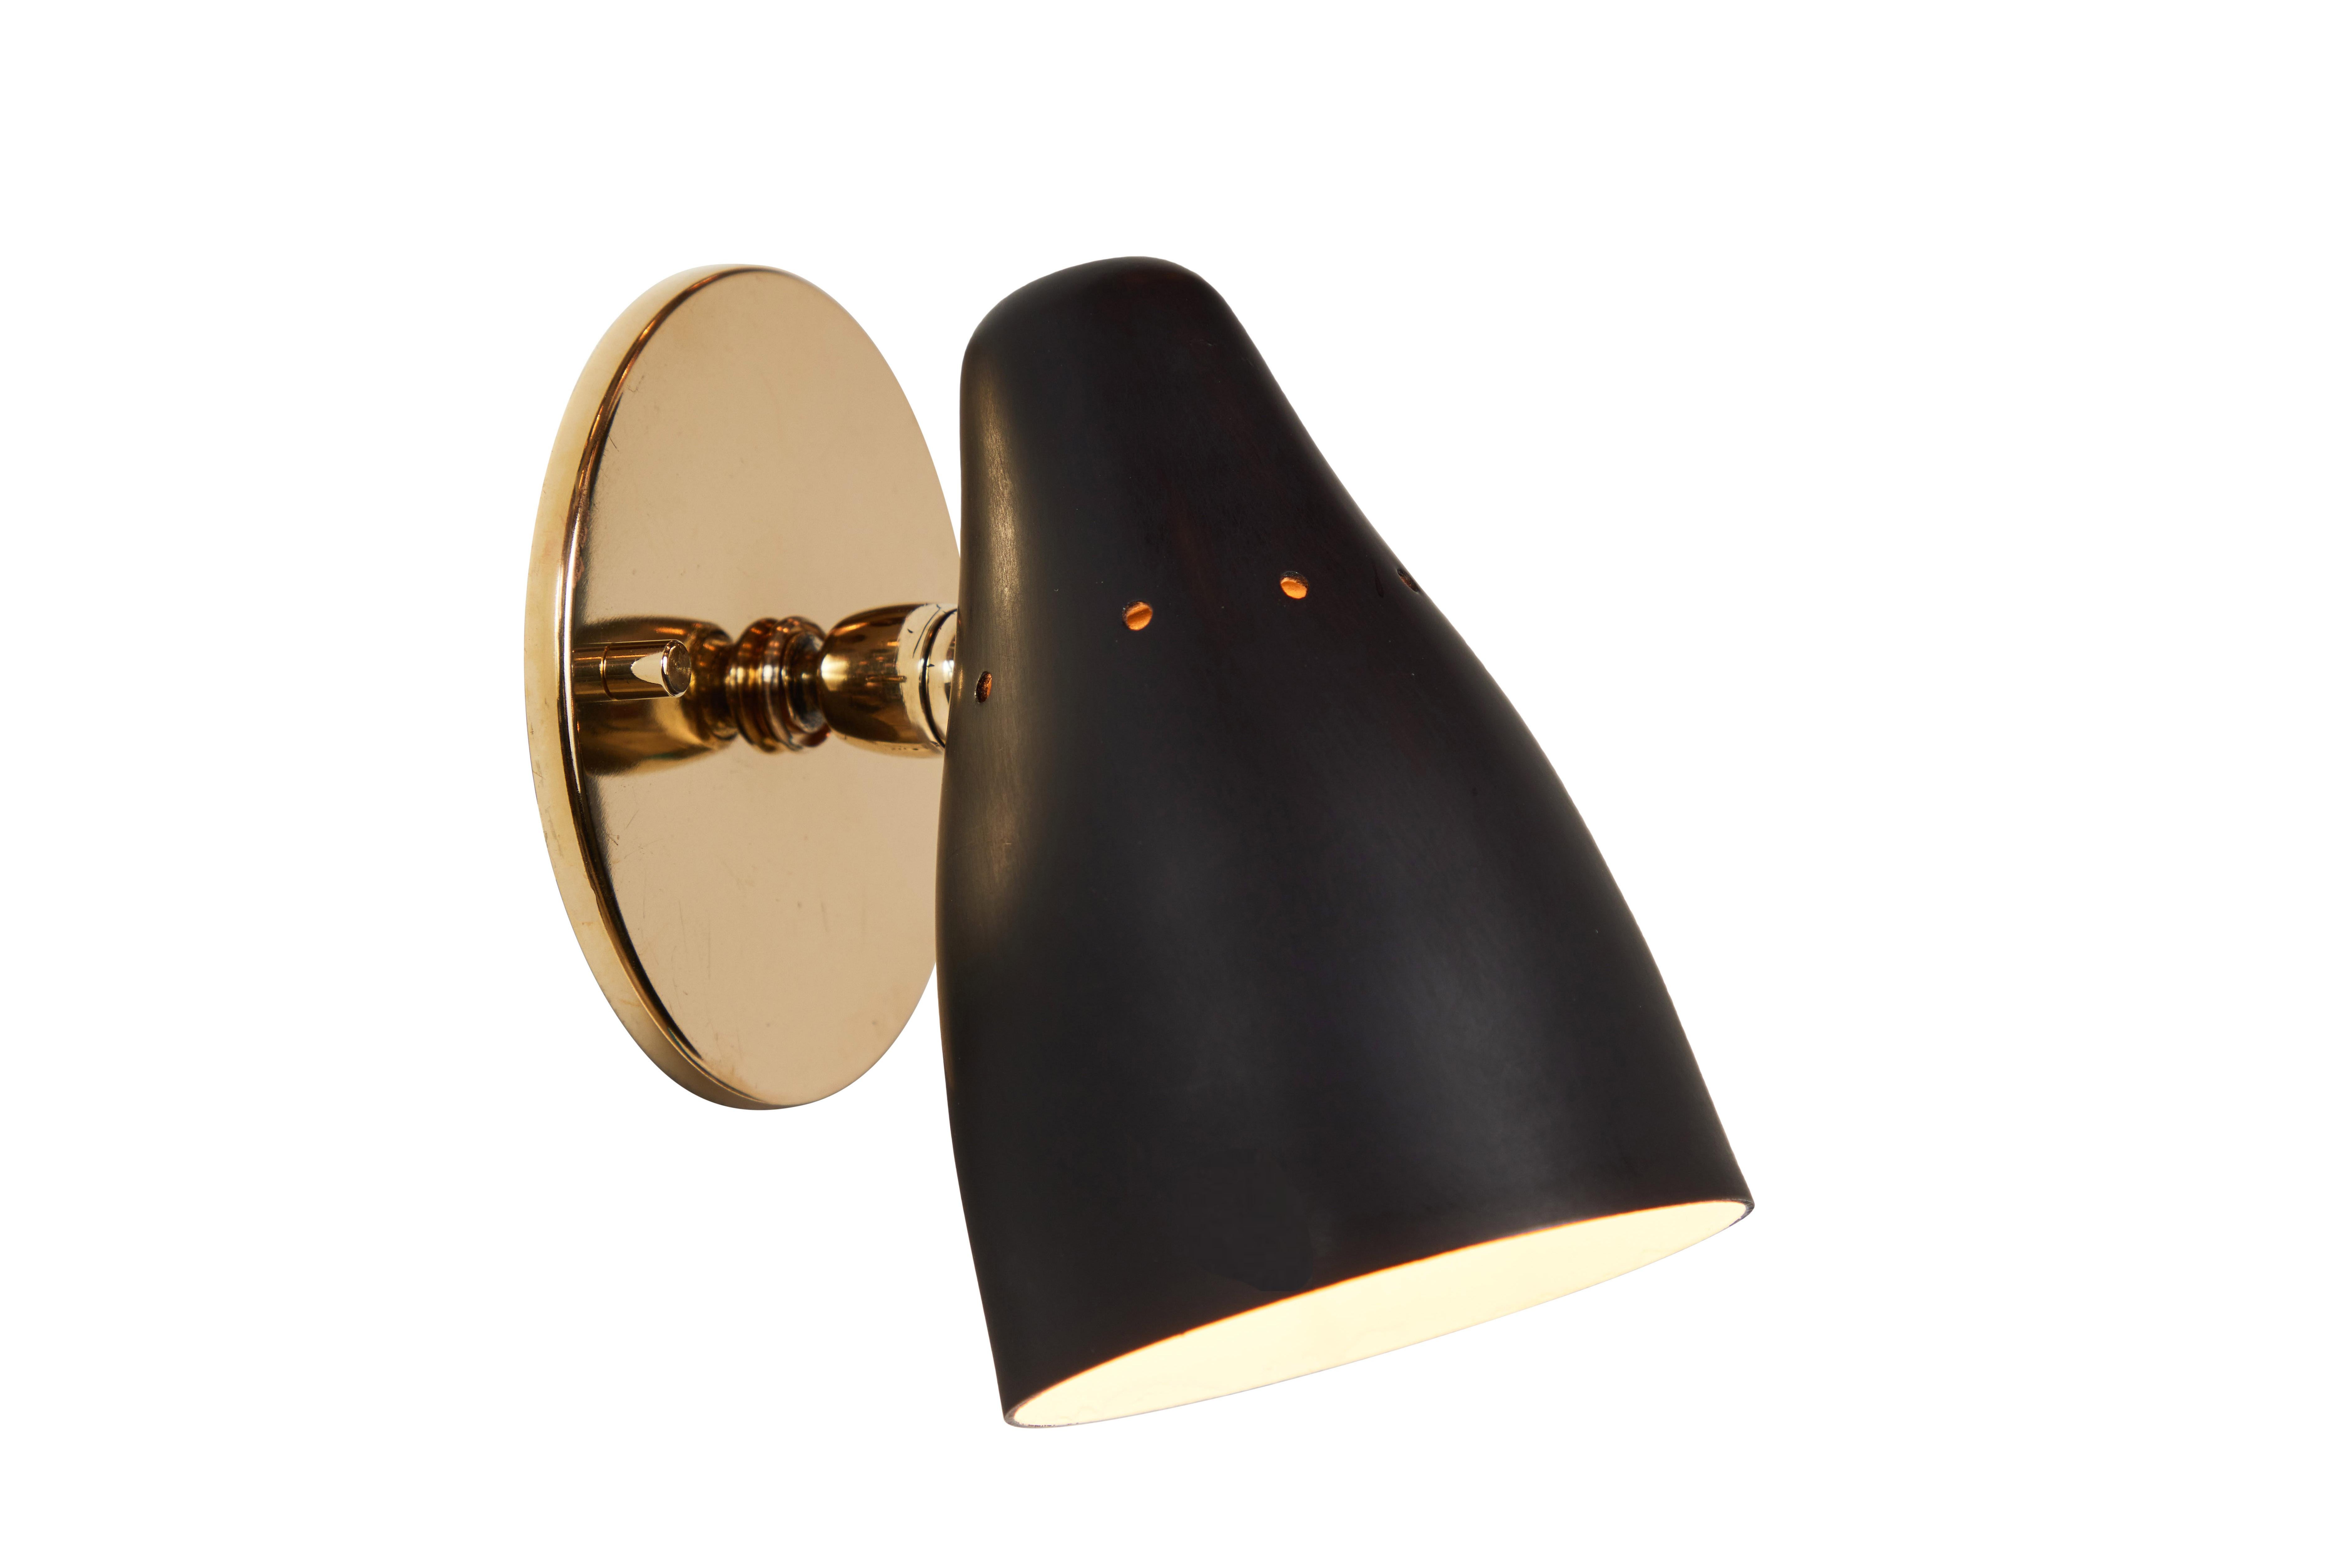 1950s Gino Sarfatti articulating sconce for Arteluce. Executed in black painted perforated metal and brass. Ball jointed arm connection to shade allows for flexible shade adjustments and multiple configurations. The simplicity of Sarfatti's design